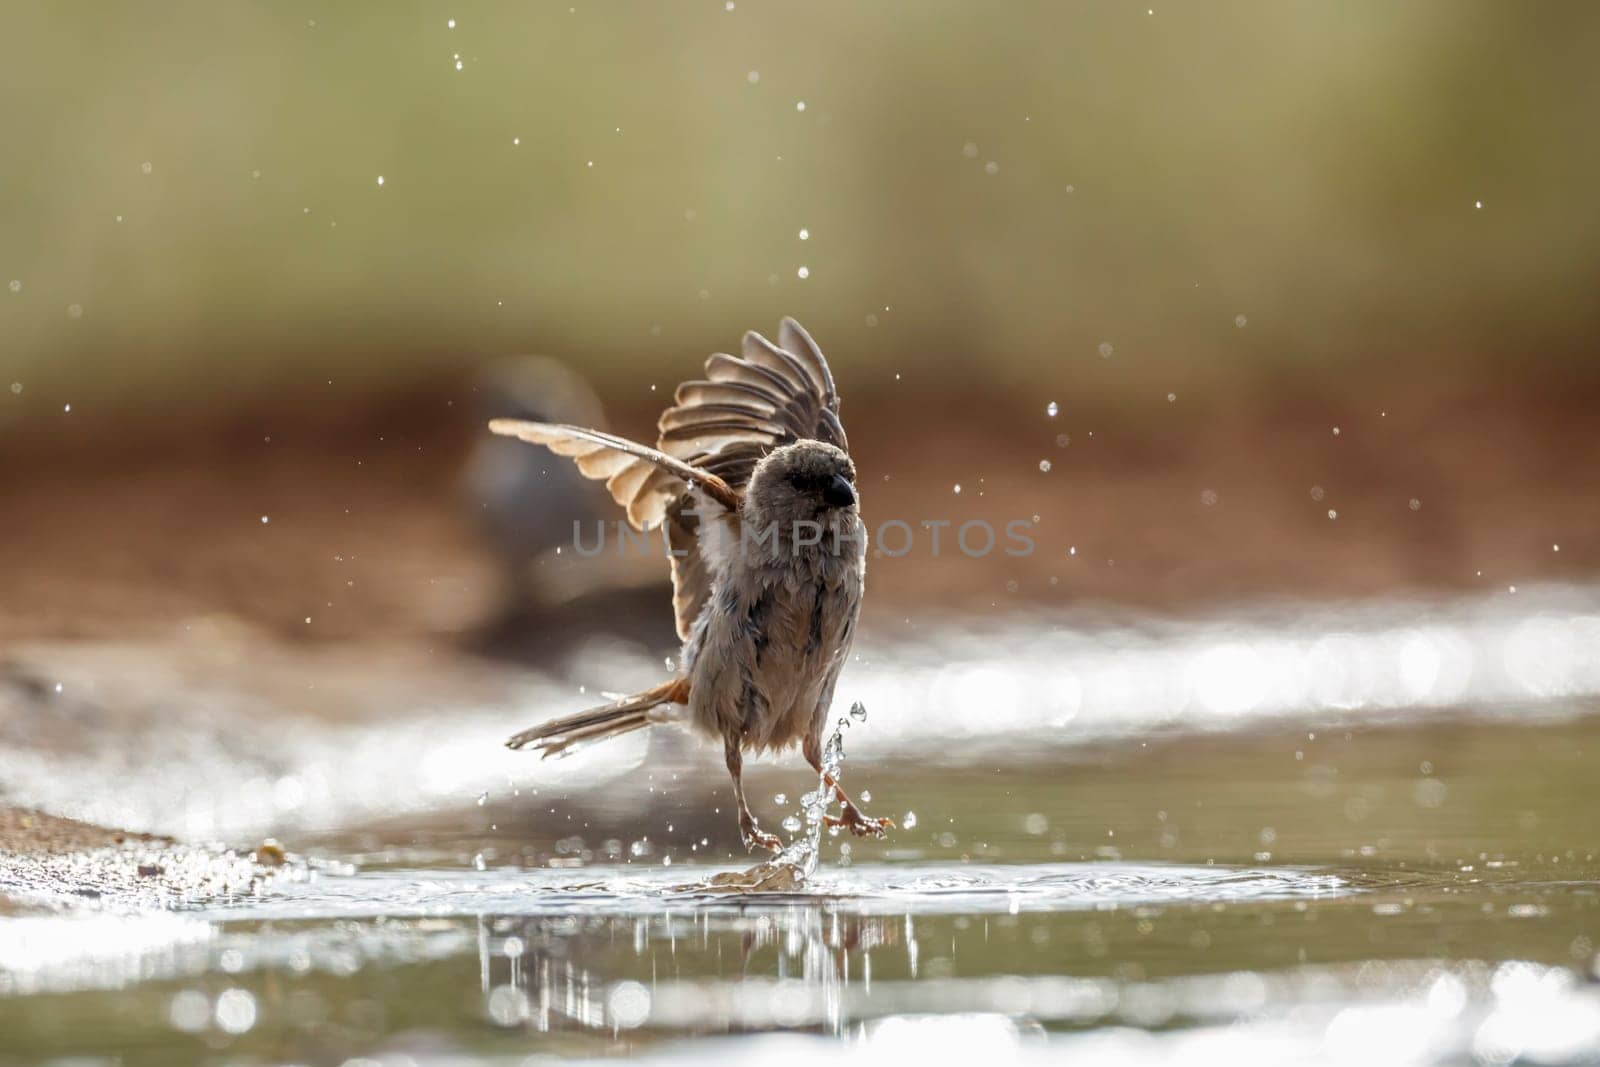 Southern Grey-headed Sparrow flying over water in Kruger National park, South Africa ; Specie family Passer diffusus of Passeridae